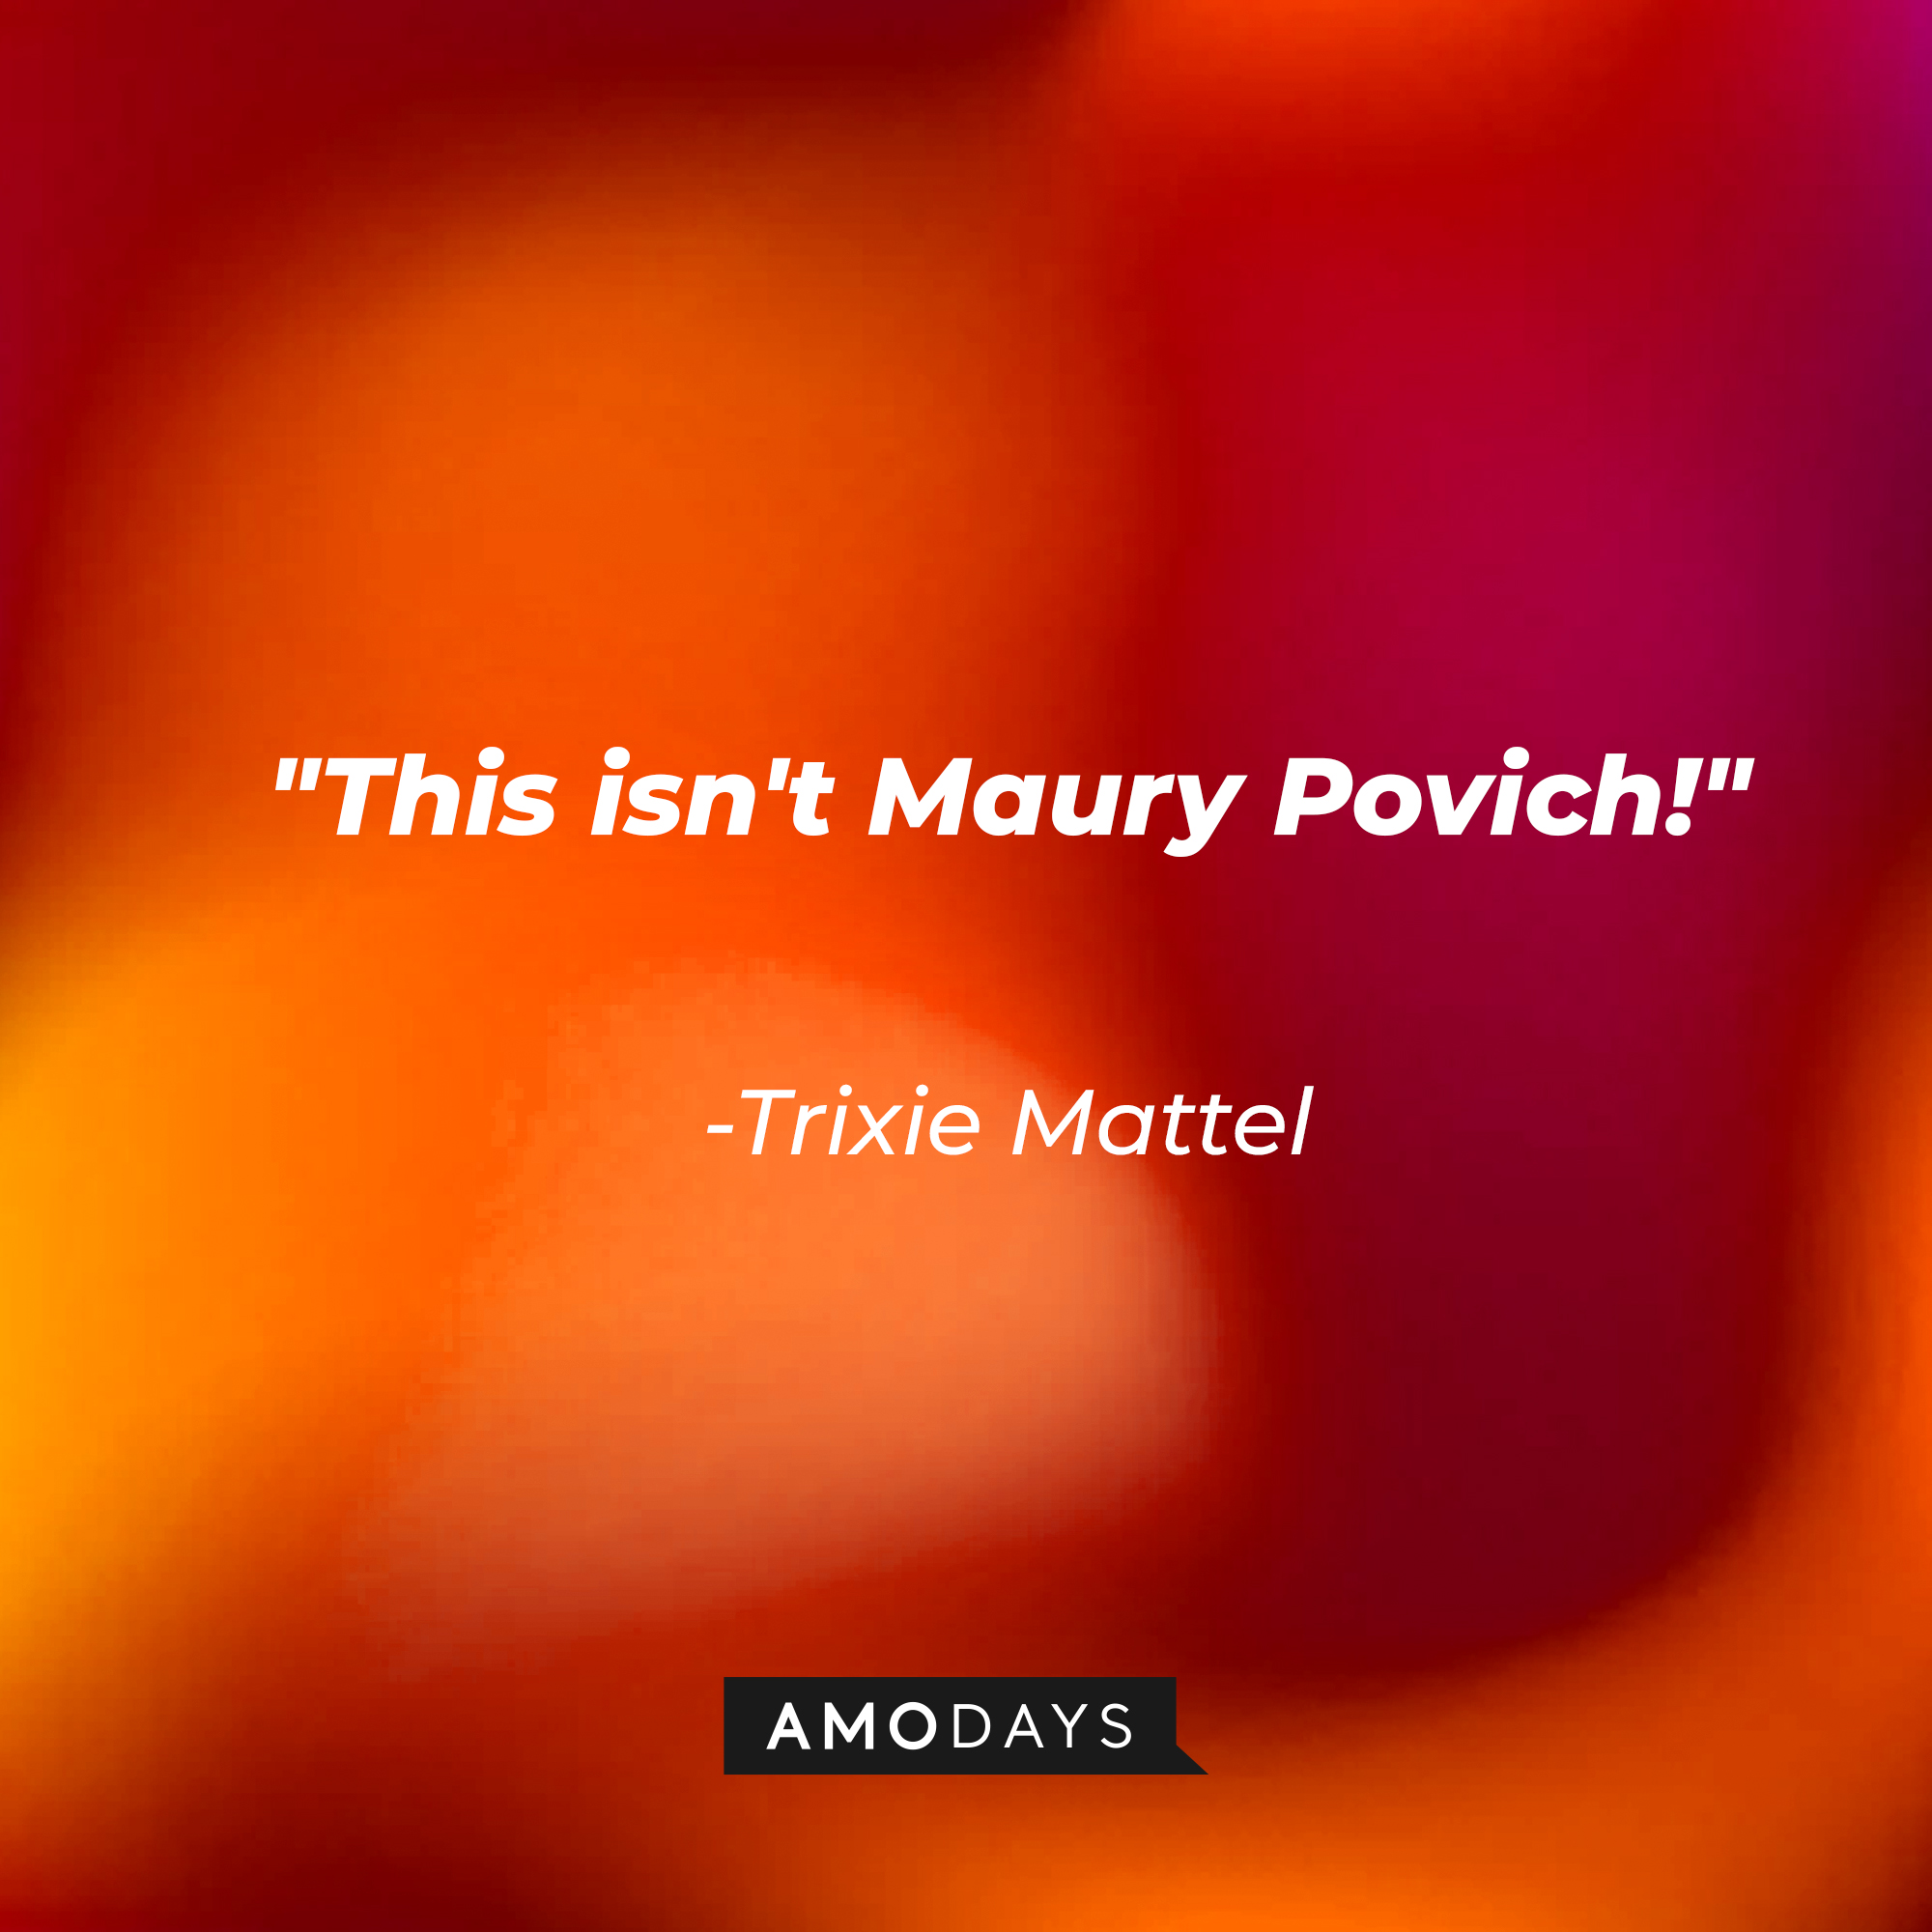 Trixie Mattel's quote: "This isn't Maury Povich!" | Source: AmoDays